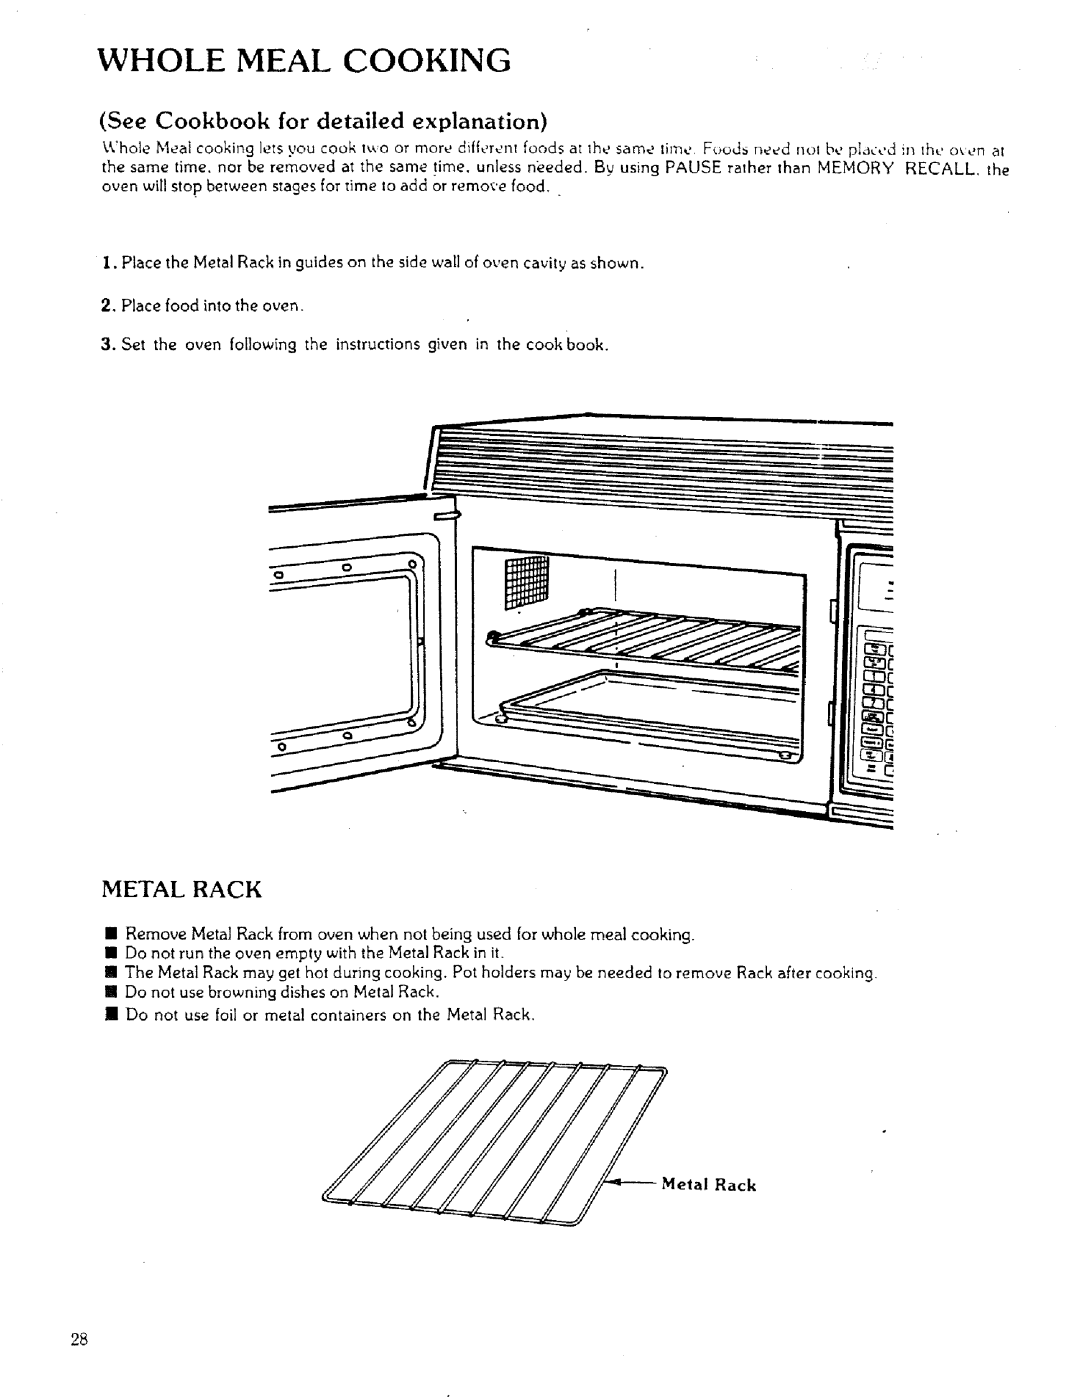 Sears 85951 manual Whole Meal Cooking, See Cookbook for detailed explanation, Metal Rack 